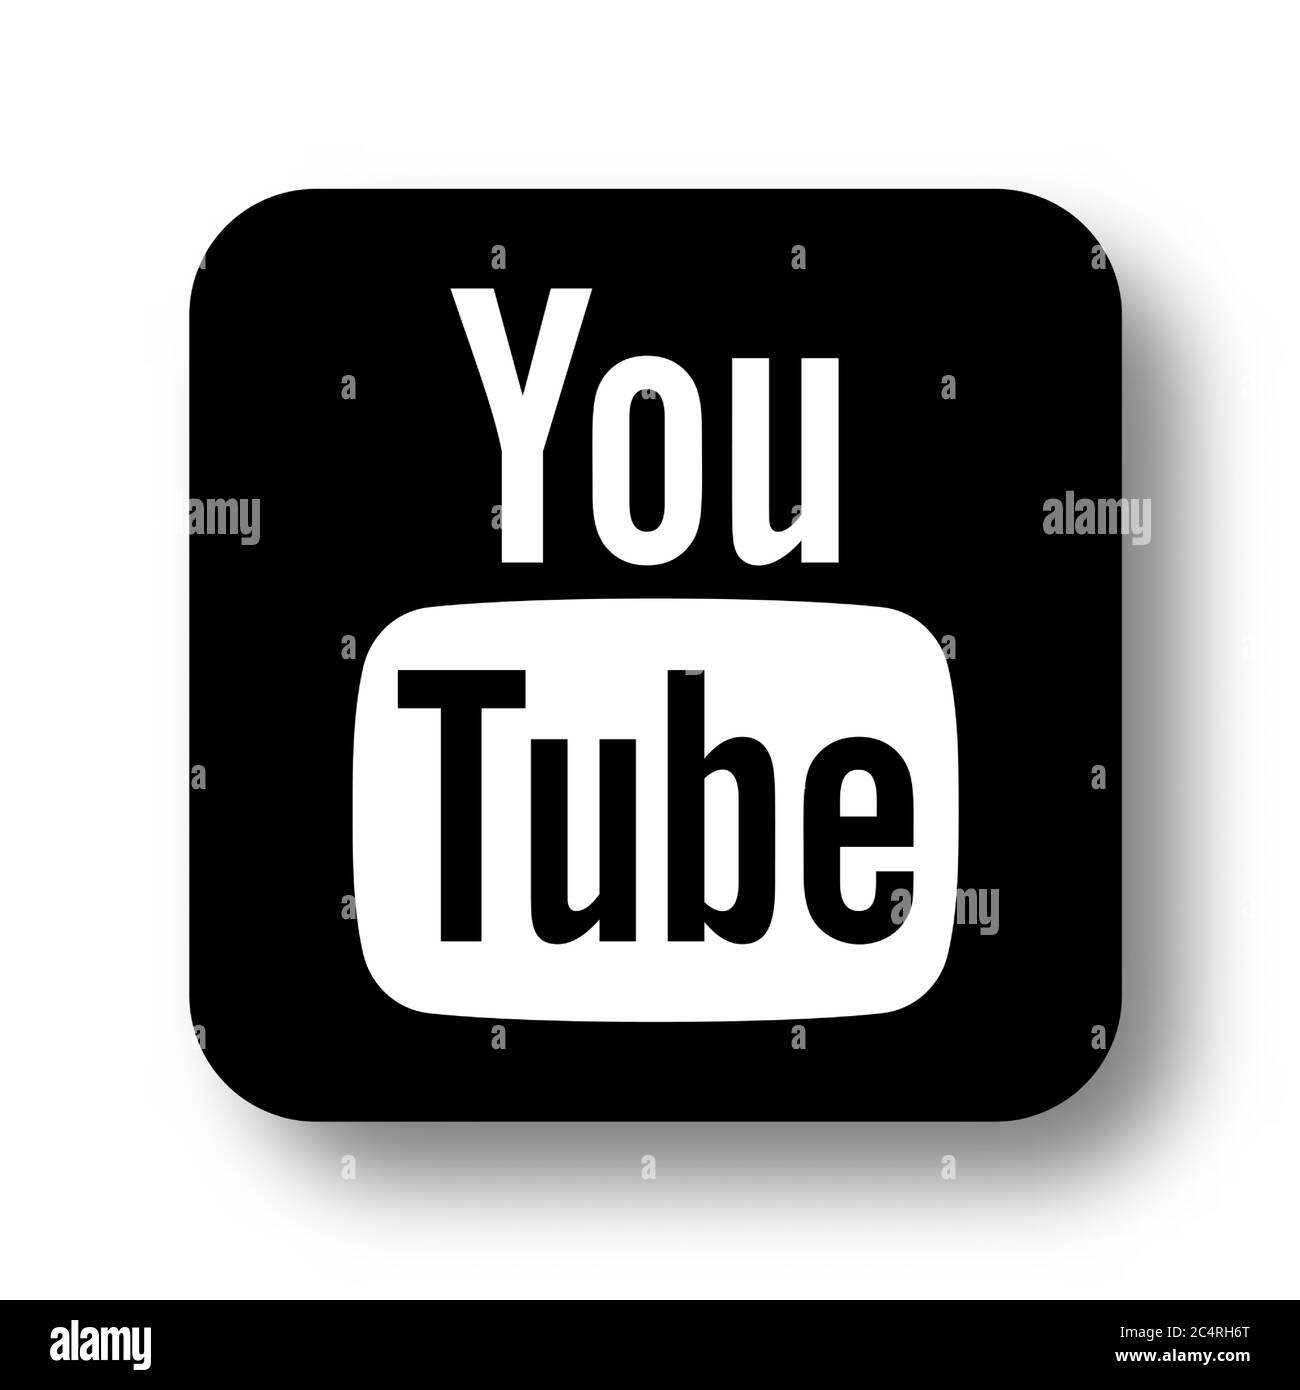 VORONEZH, RUSSIA - JANUARY 31, 2020: Youtube logo black square icon with soft shadow Stock Vector